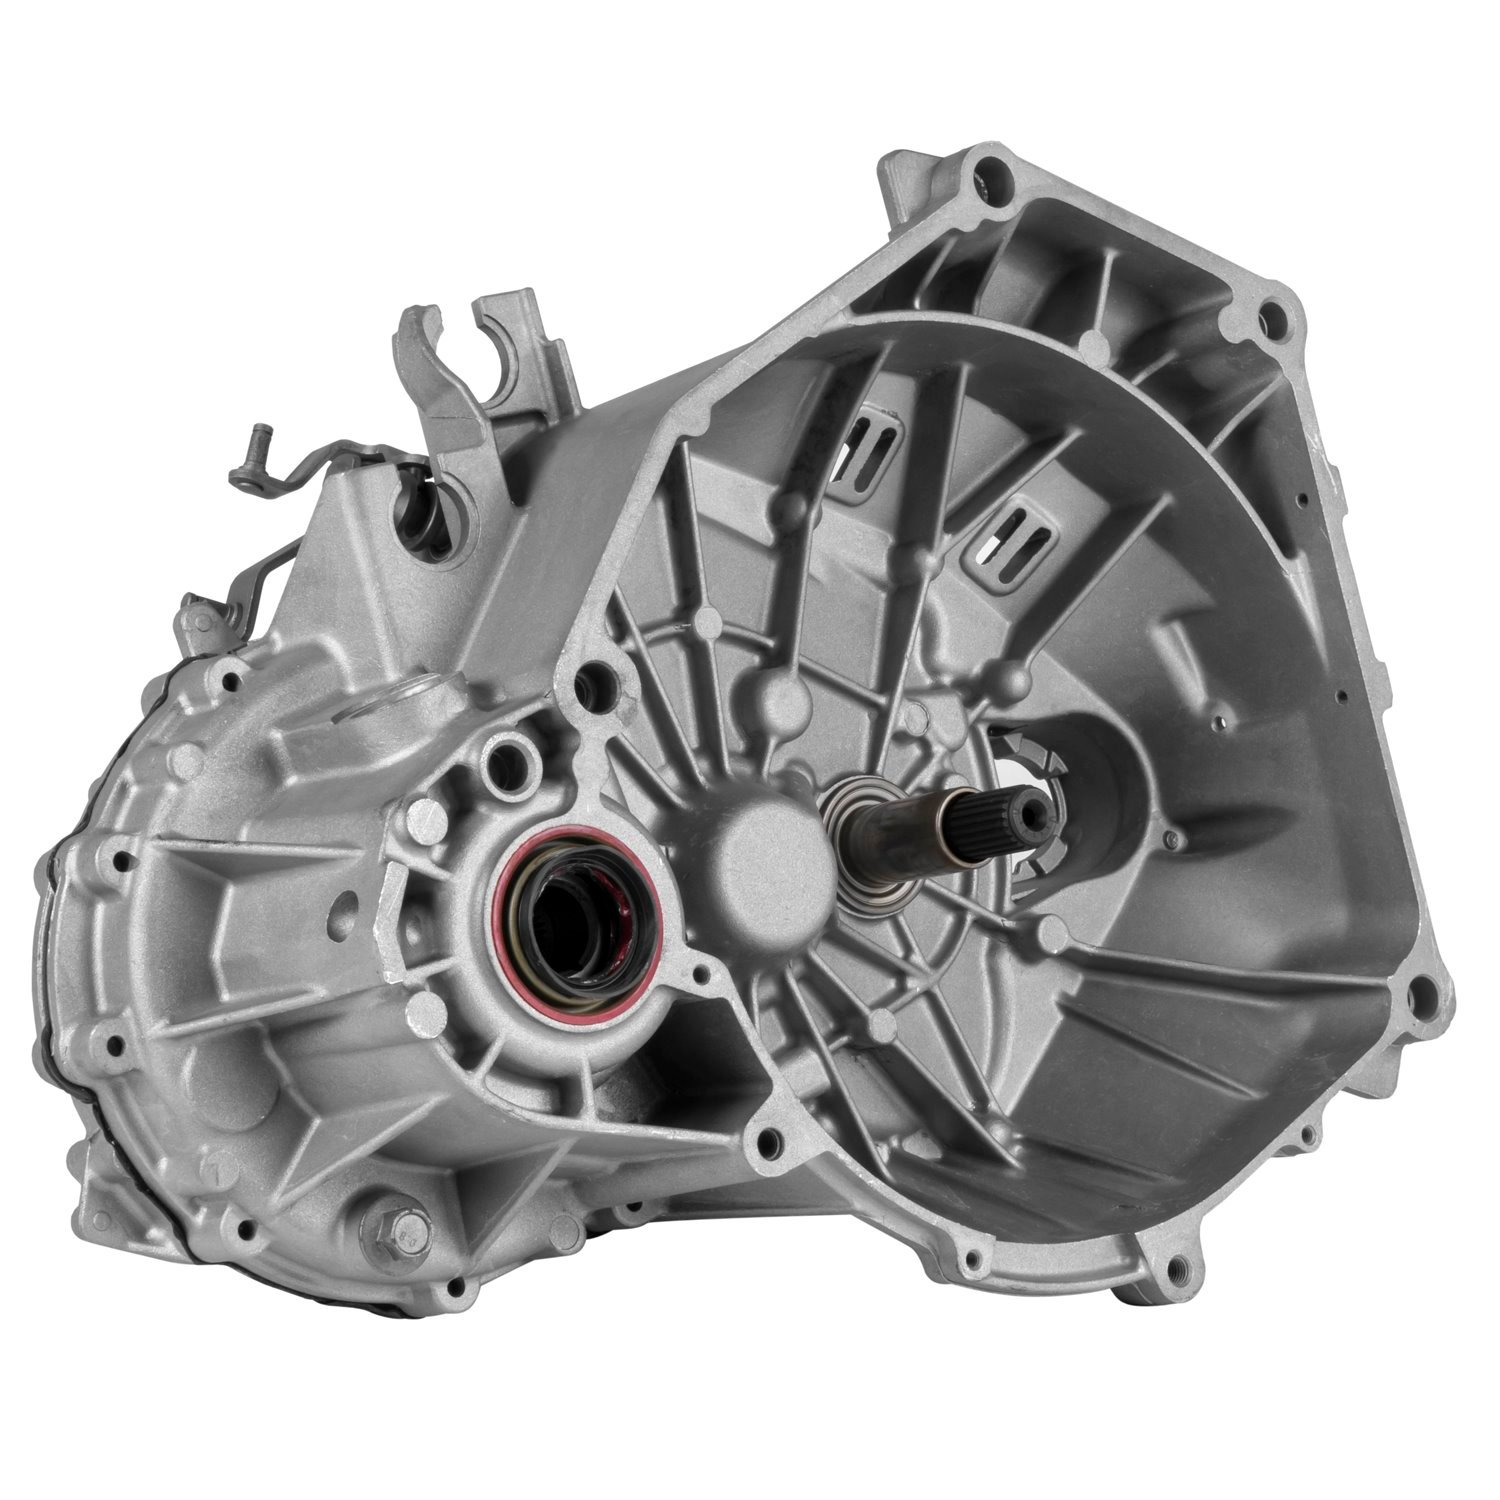 Remanufactured Manual Transmission for 1993-2001 Saturn S-Series 5SPD with SOHC, FWD